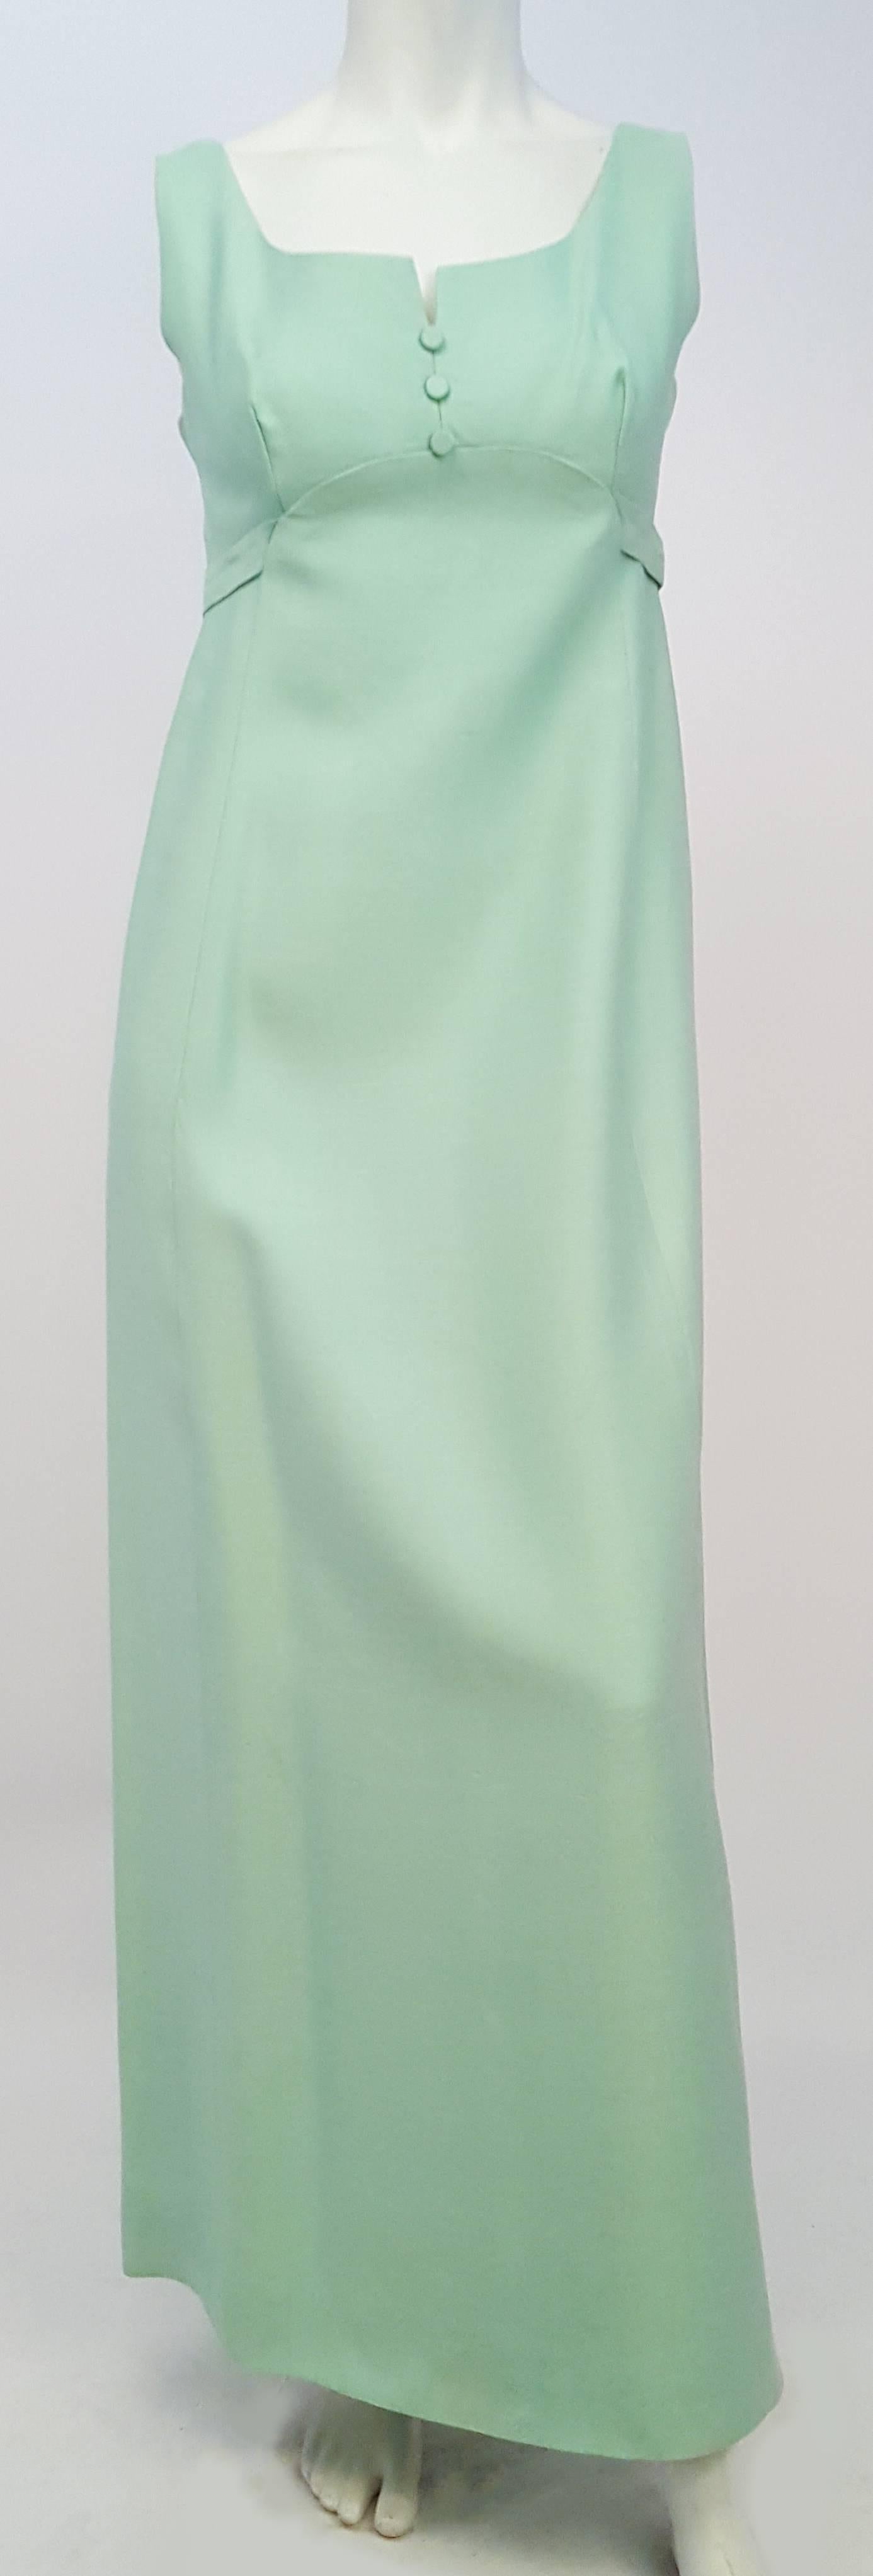 60s Emma Domb Mint Green Dress and Evening Coat Set. Snap front closures on coat. Fully lined.